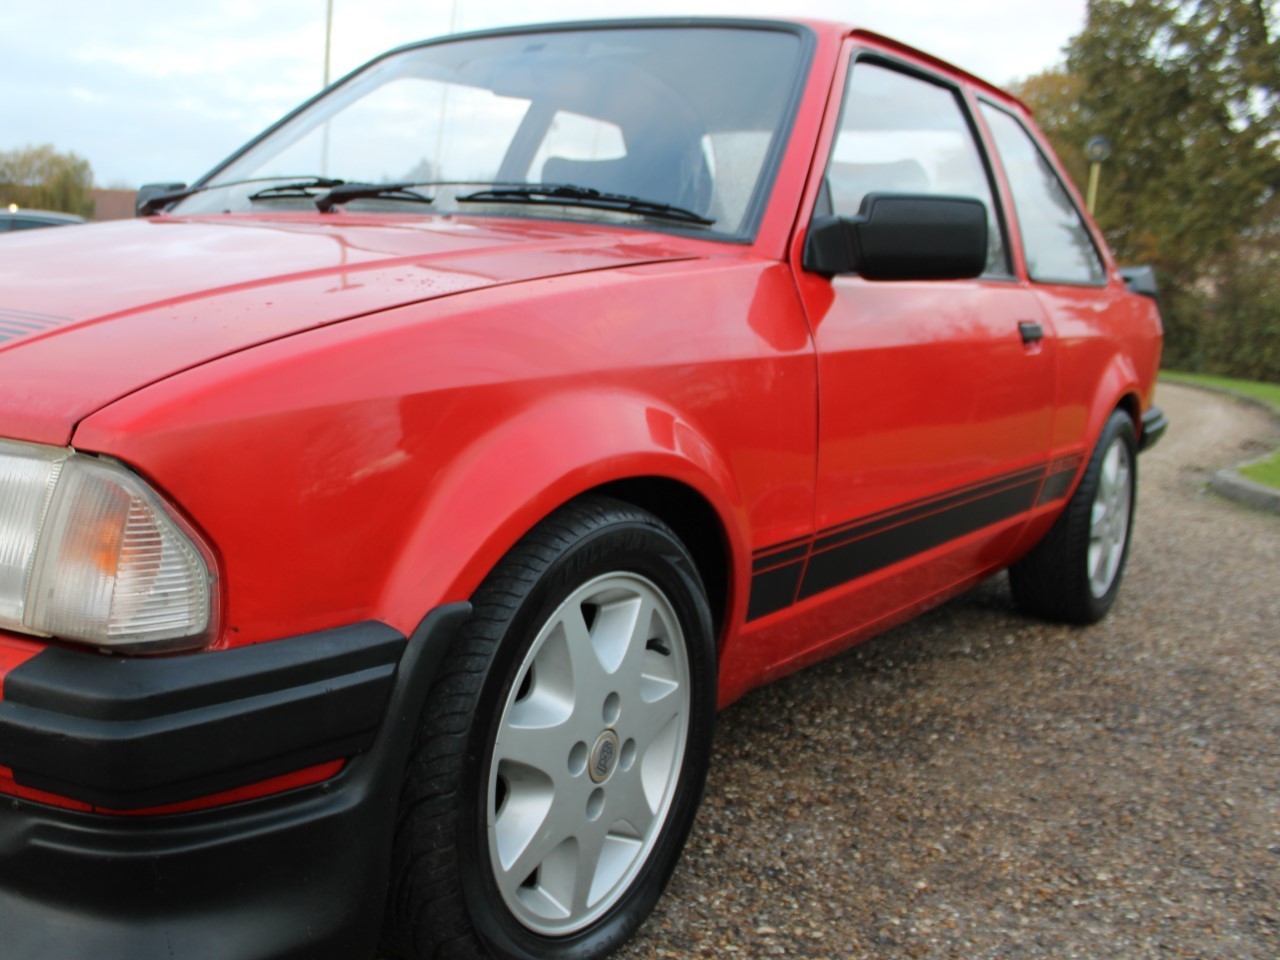 1983 Ford Escort RS 1600i - Image 7 of 24